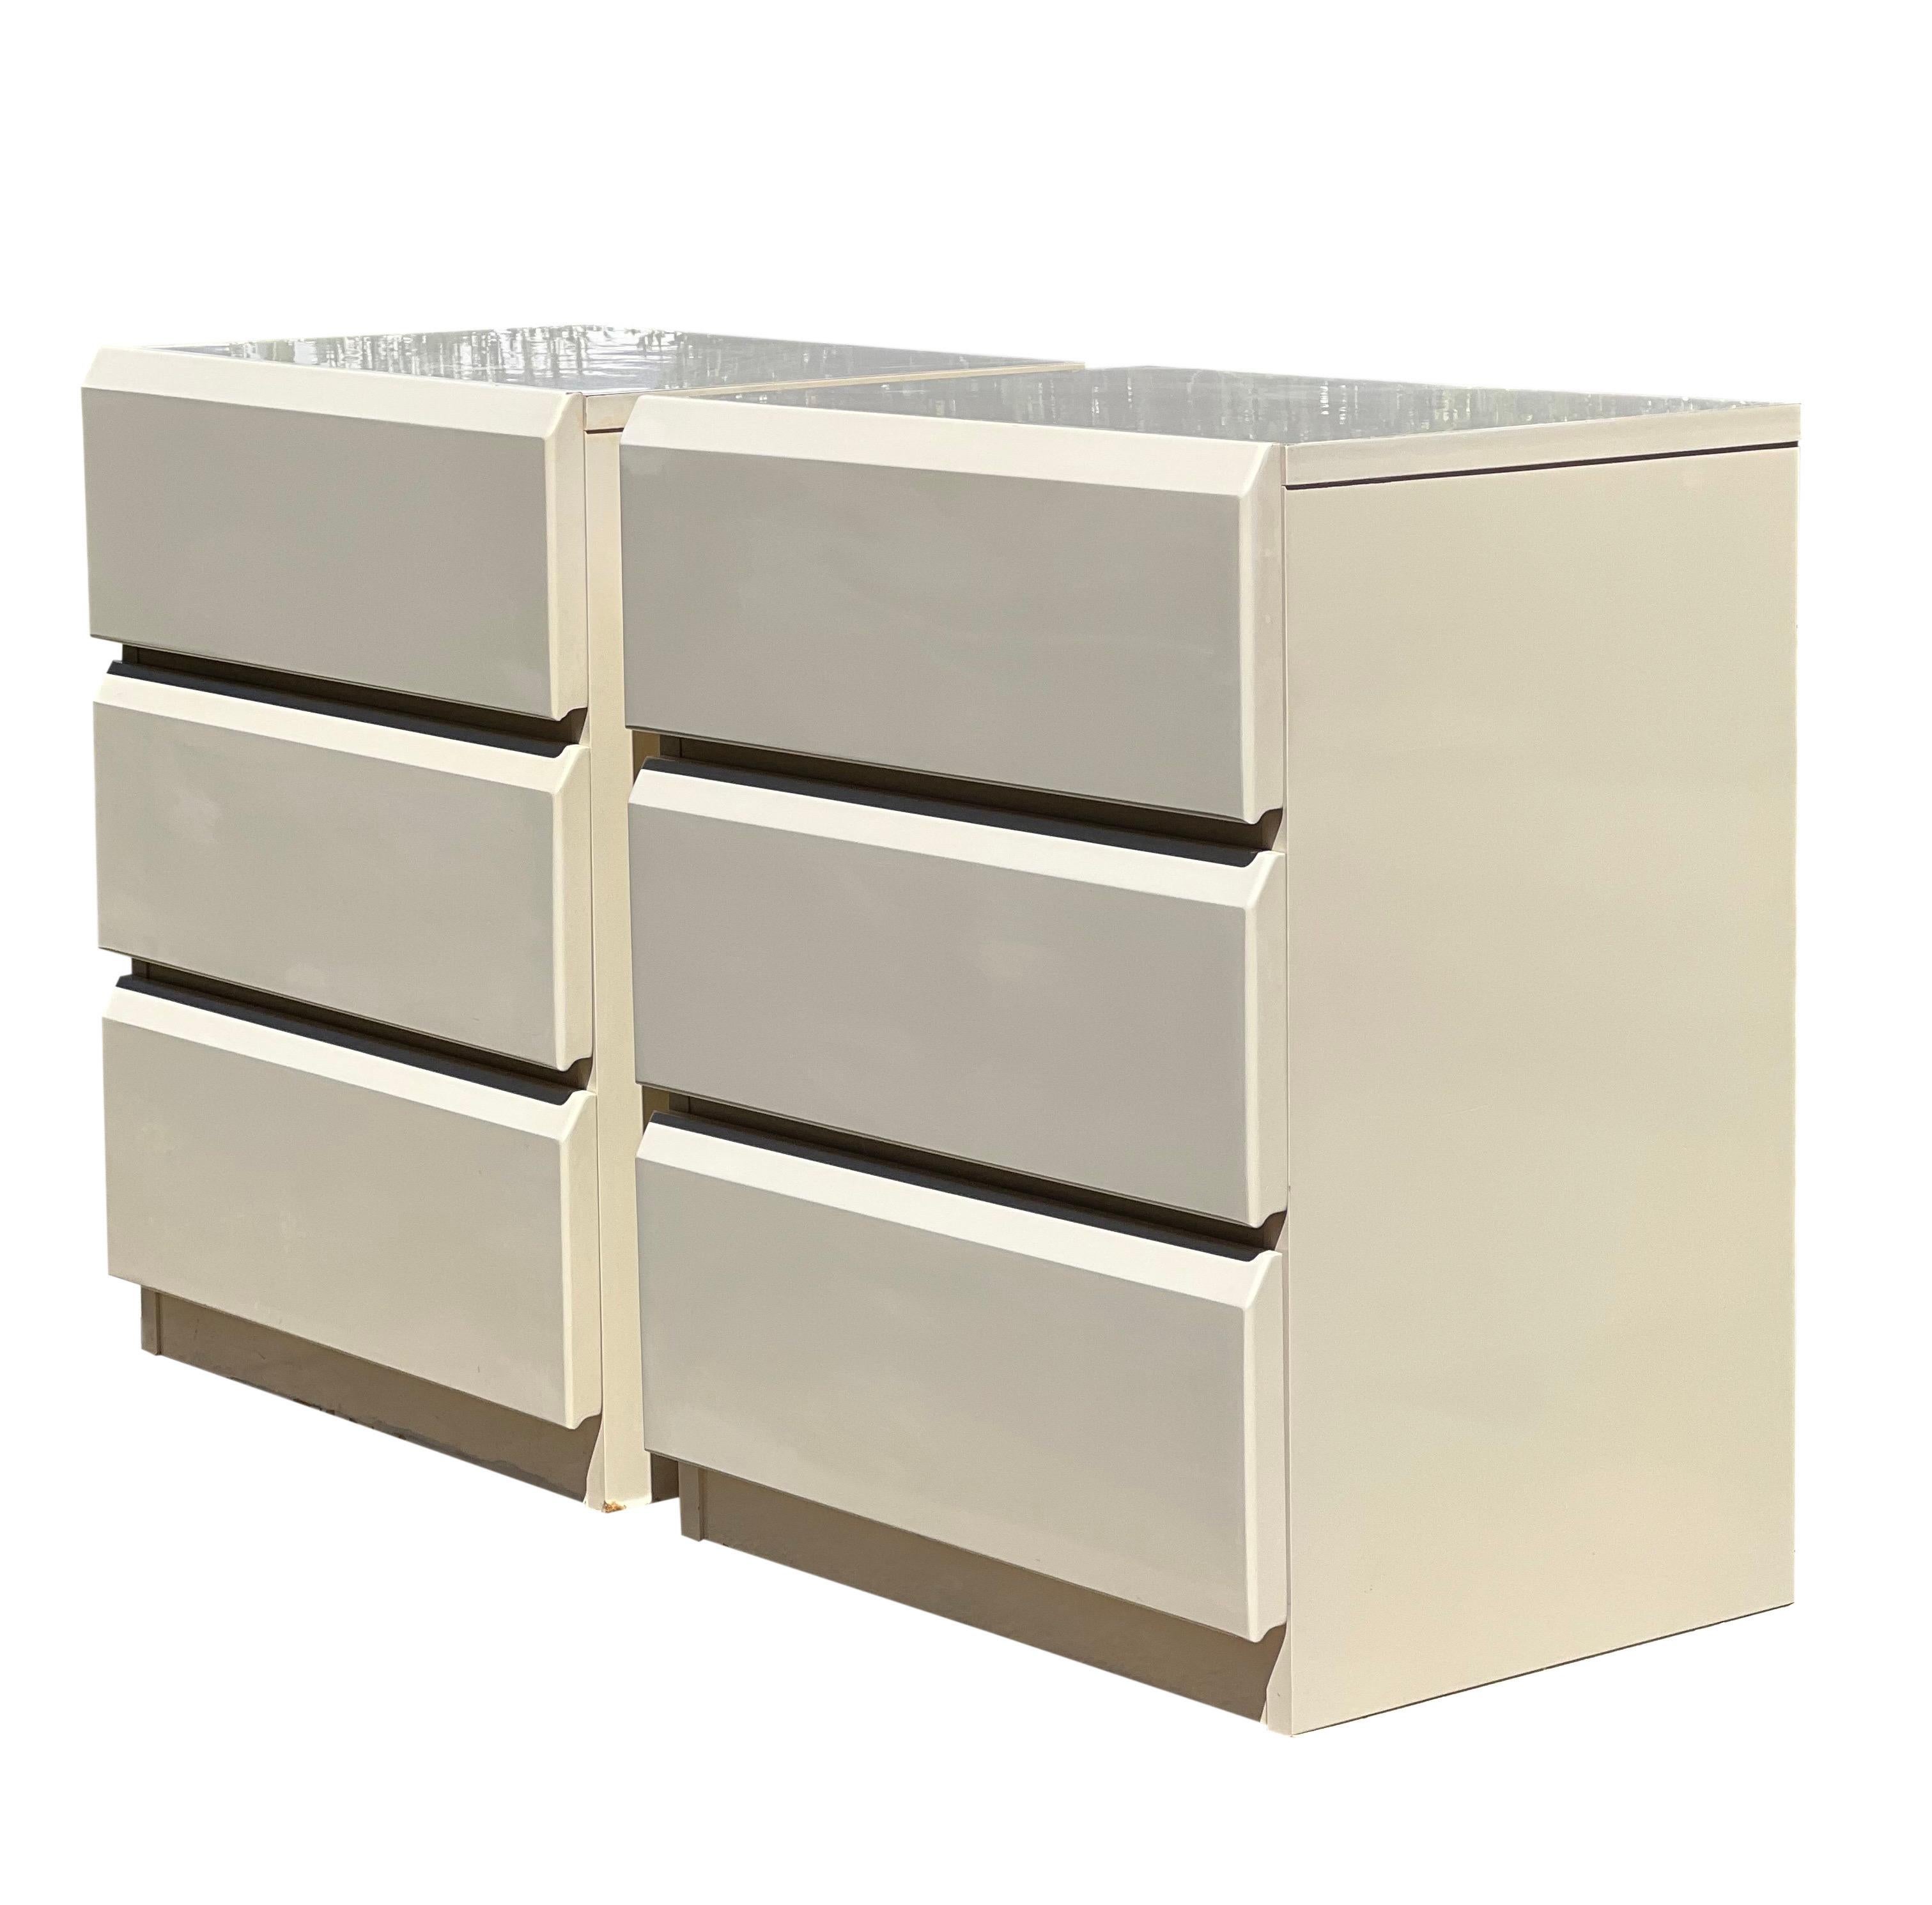 Fabulous pair of Post-Modern nightstands or chests by Lane, Altavista.

The stands feature a high gloss, protective lacquer in creamy white over solid wood. They offer lots of storage with three large, clean drawers which operate smoothly. The